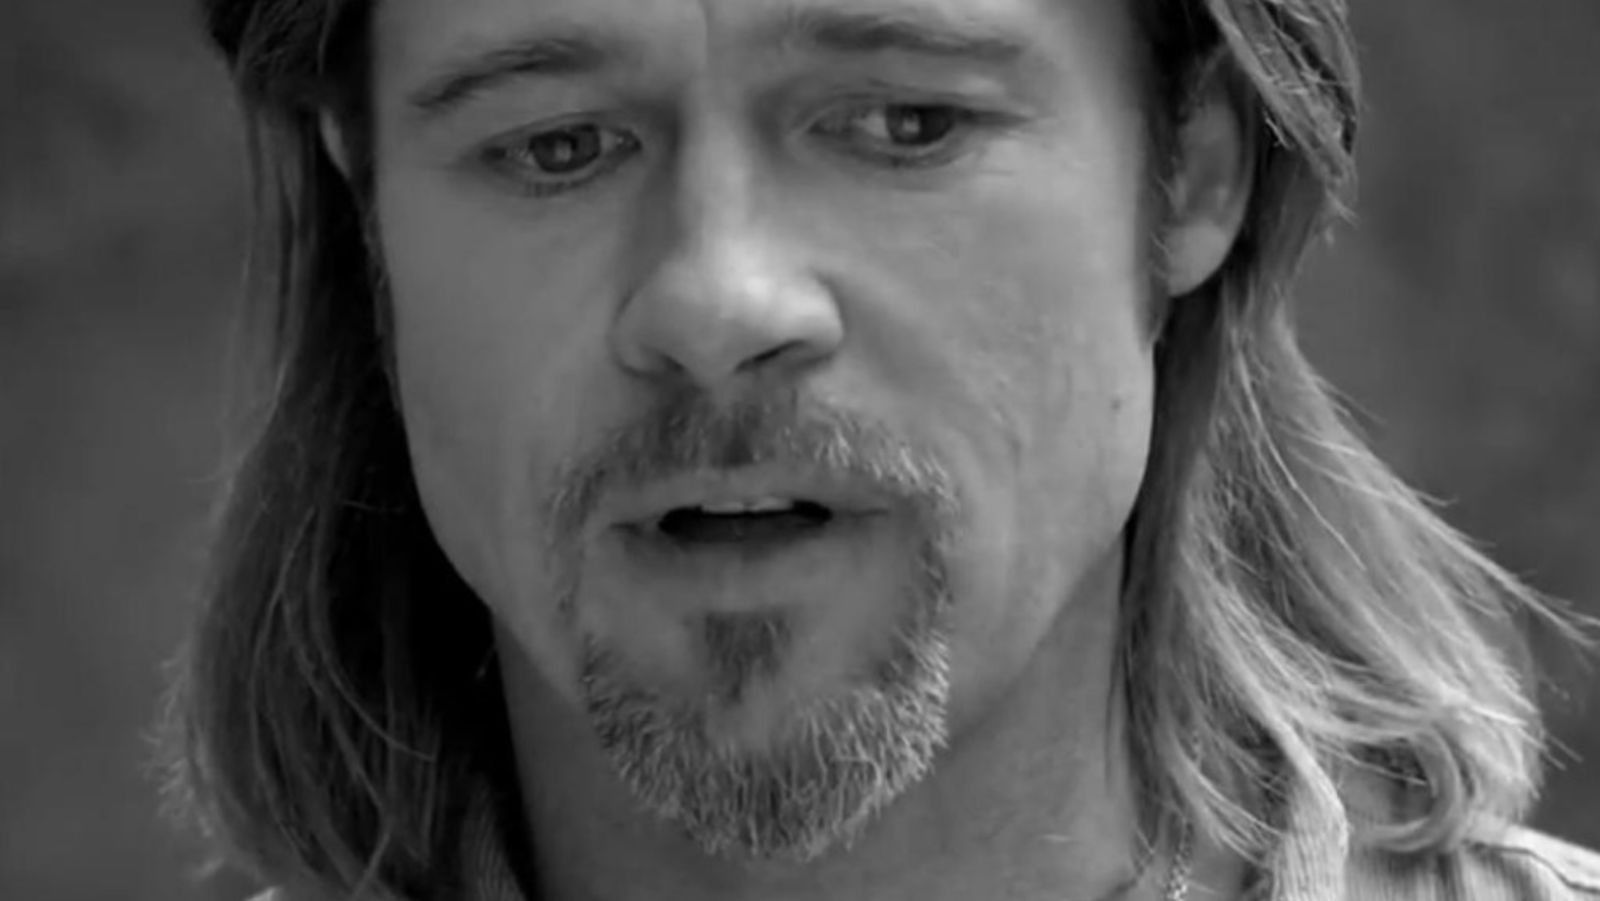 Confusion over Brad Pitt's new role as face of Chanel N°5 fragrance